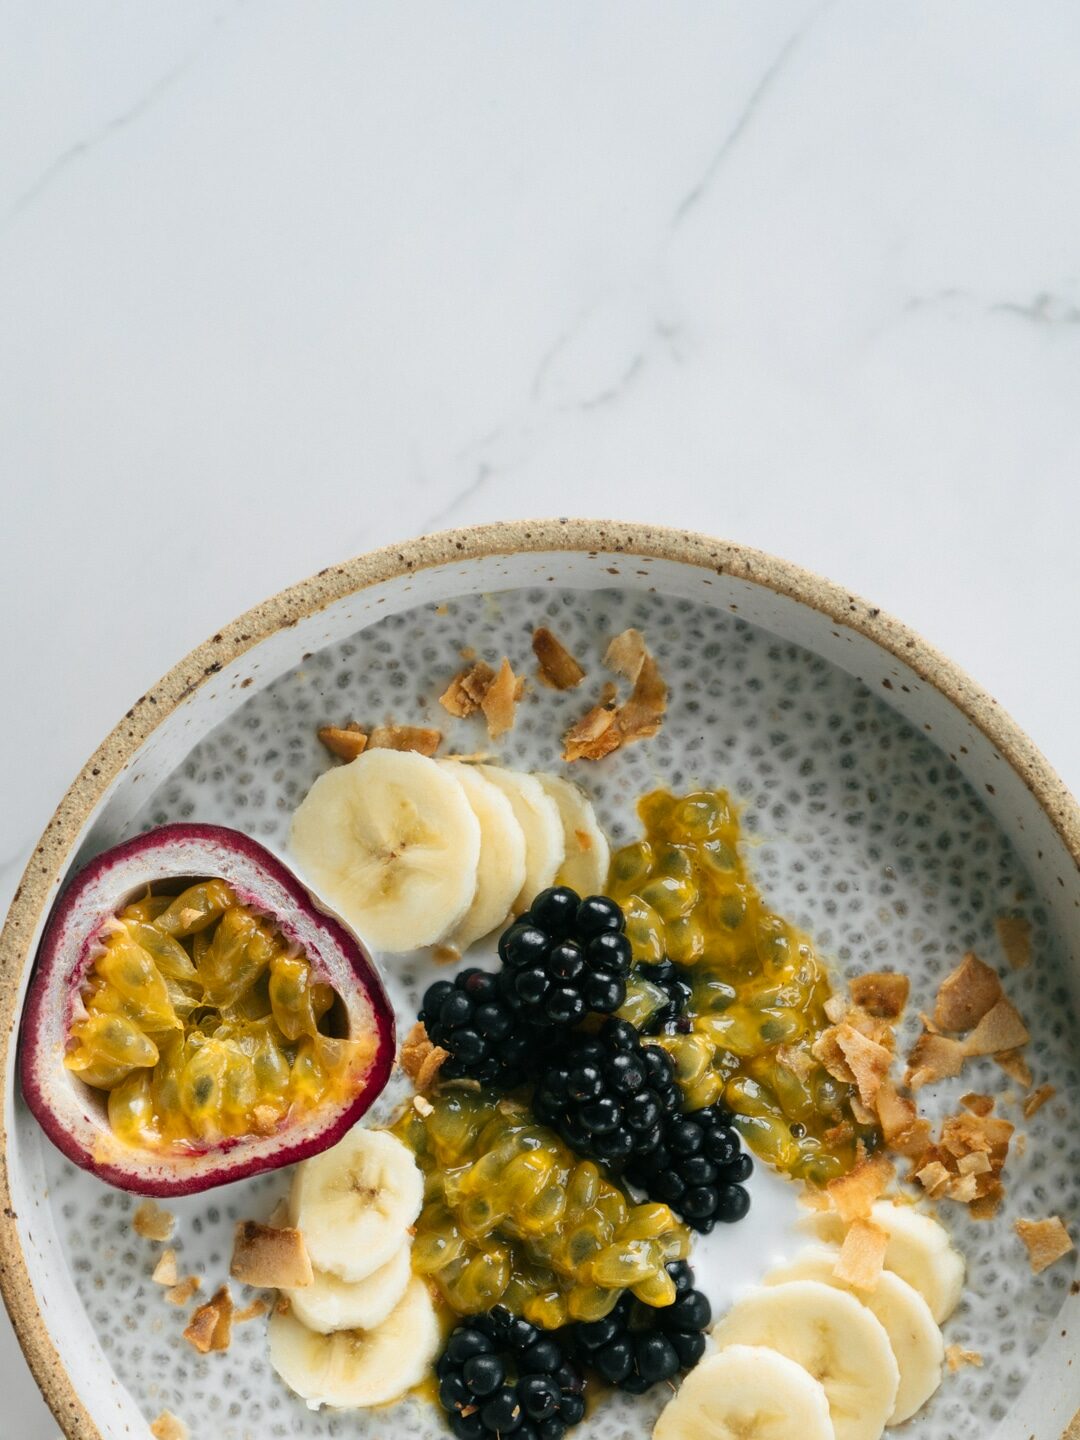 Creamy Coconut Chia Pudding With Passion Fruit